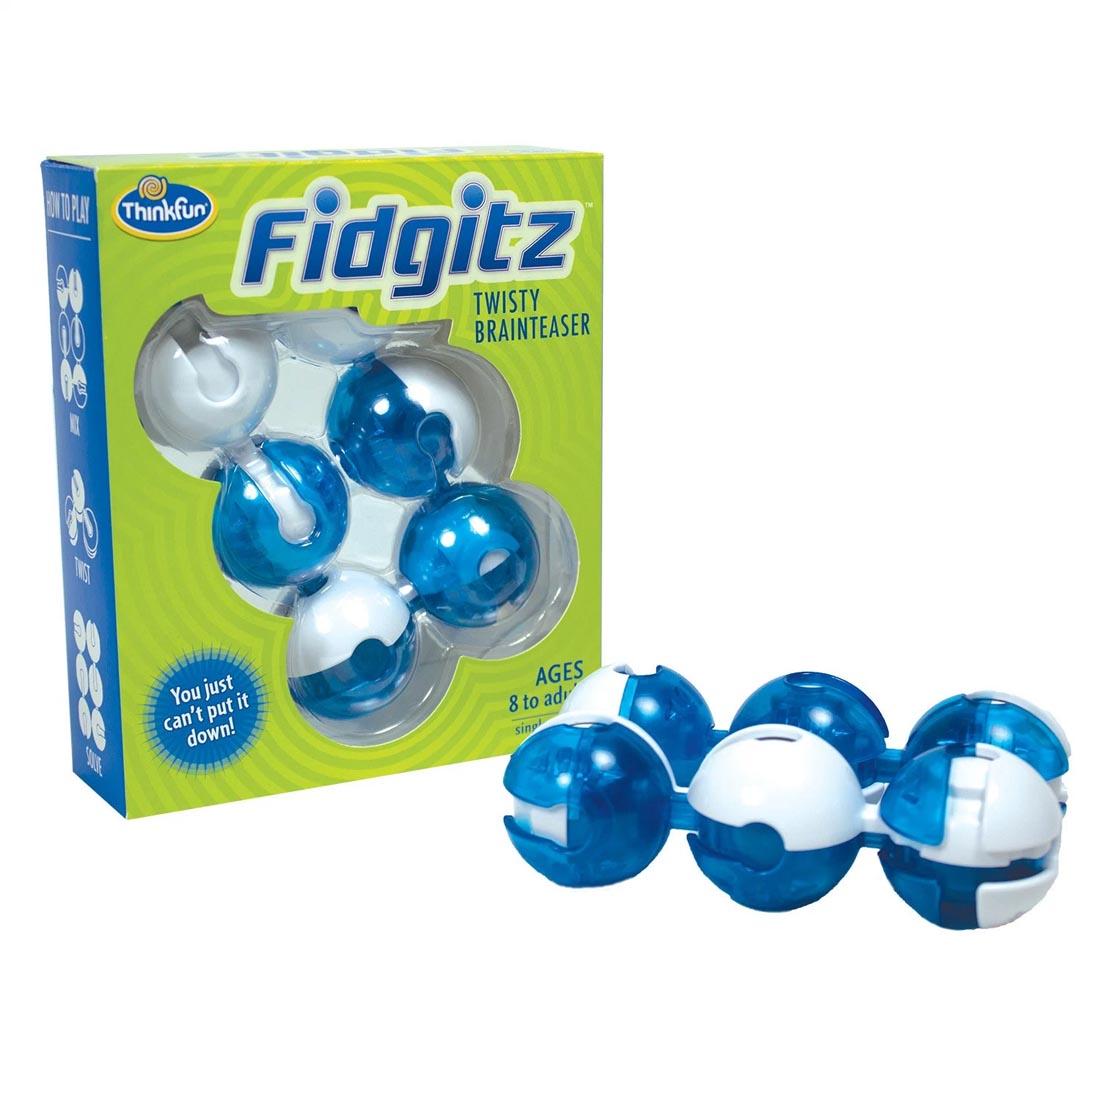 Thinkfun Fidgitz Brainteaser Game shown both in and out of package